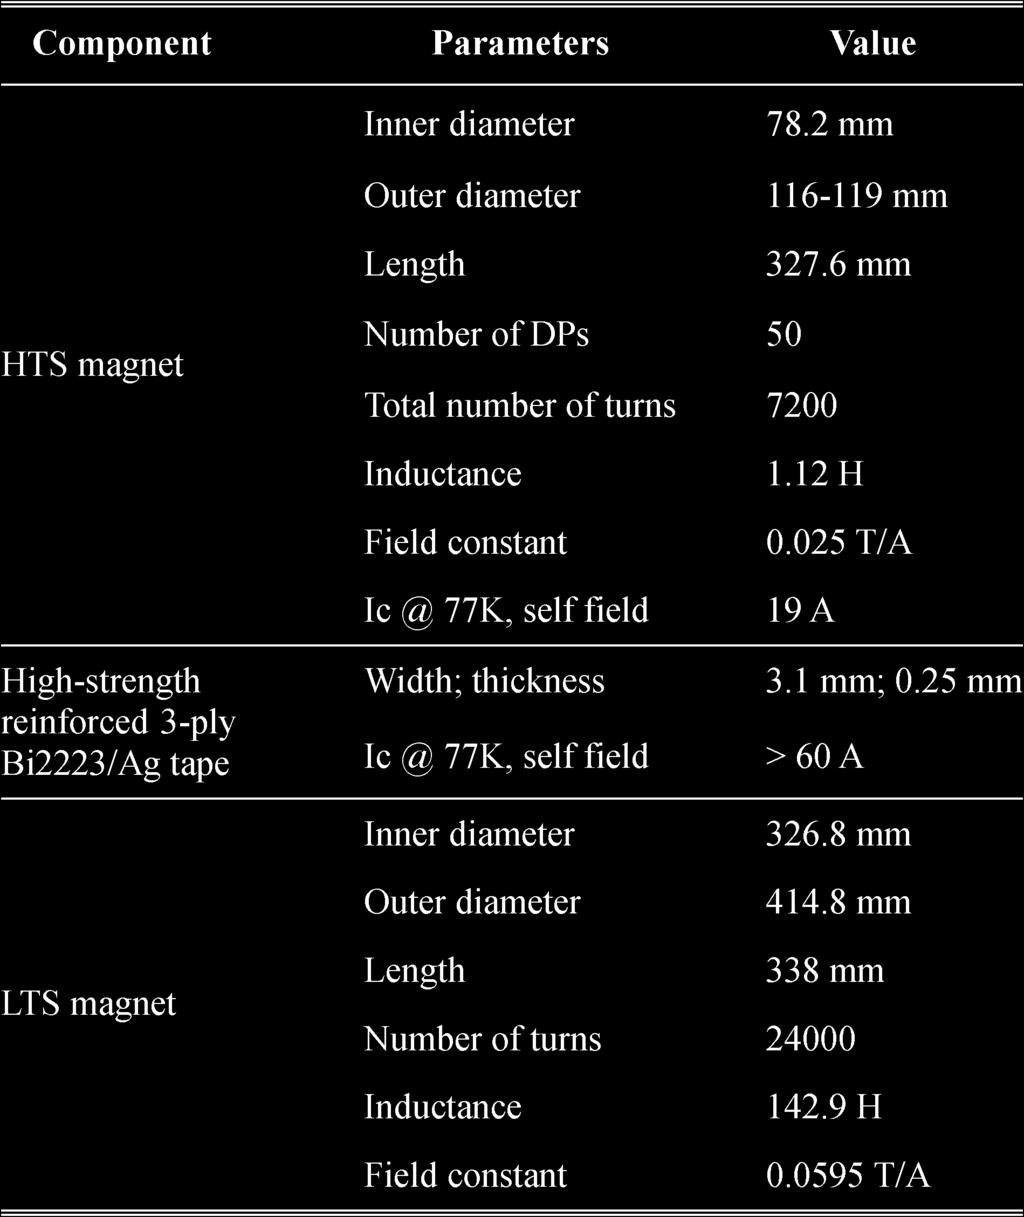 2270 IEEE TRANSACTIONS ON APPLIED SUPERCONDUCTIVITY, VOL. 19, NO. 3, JUNE 2009 TABLE I SPECIFICATIONS OF THE HTS MAGNET, BI2223 TAPE, AND LTS MAGNET Fig. 2. Field vs.